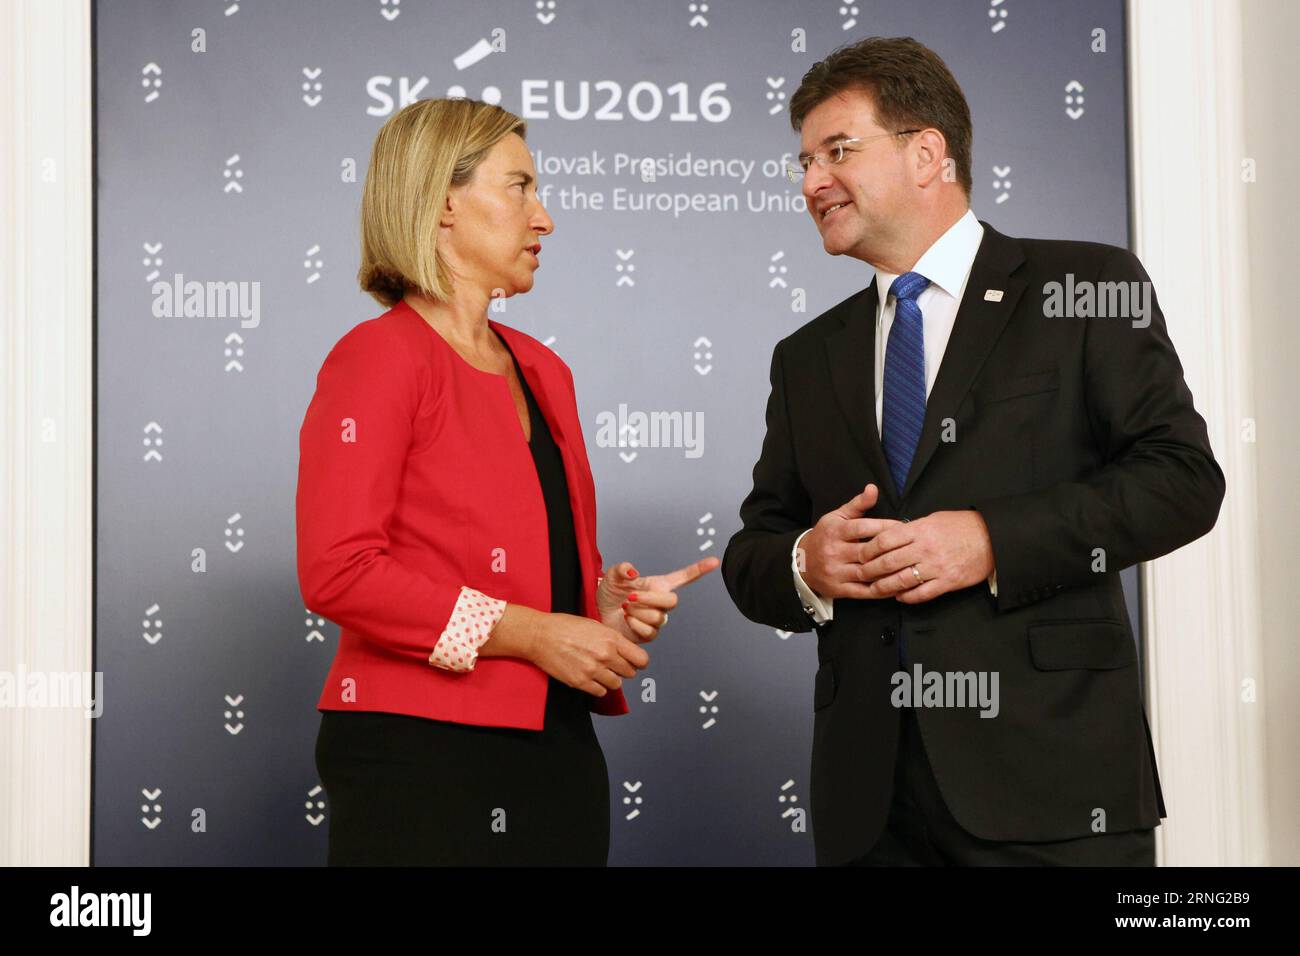 (160902) -- BRATISLAVA, Sept.2, 2016 -- Slovak Minister of foreign and European Affairs Mirislav Lajcak (R) talks with European Union (EU) High Representative for Foreign Affairs and Security Policy Federica Mogherini before the informal meeting of foreign affairs ministers, also known as Gymnich, in Bratislava, capital of Slovakia, Sept. 2, 2016. The current issues of global foreign and security policy will be high on the agenda of Gymnich, which kicked off on Friday. ) SLOVAKIA-BRATISLAVA-EU FM MEETING AndrejxKlizan PUBLICATIONxNOTxINxCHN   160902 Bratislava Sept 2 2016 Slovak Ministers of F Stock Photo